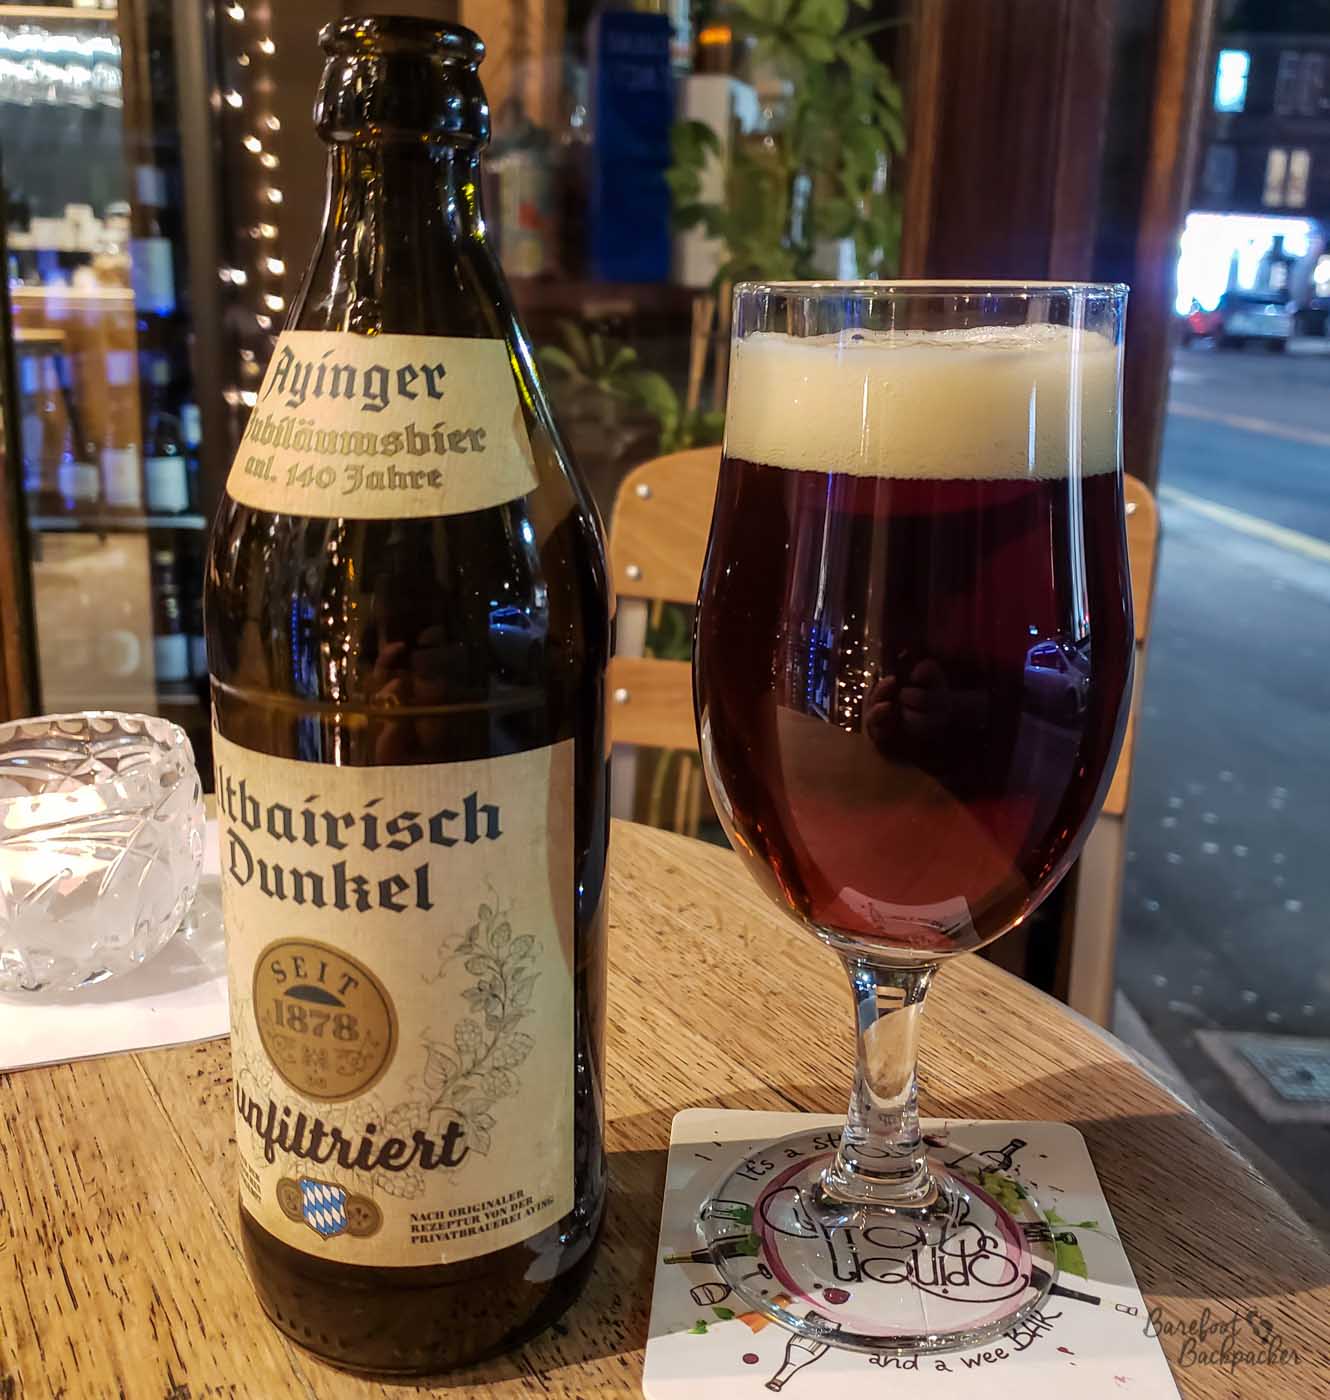 A bottle of beer stands on a table. To the right of it is a glass with the beer in. The beer is 'Ayinger Altbarisch Dunkel'.